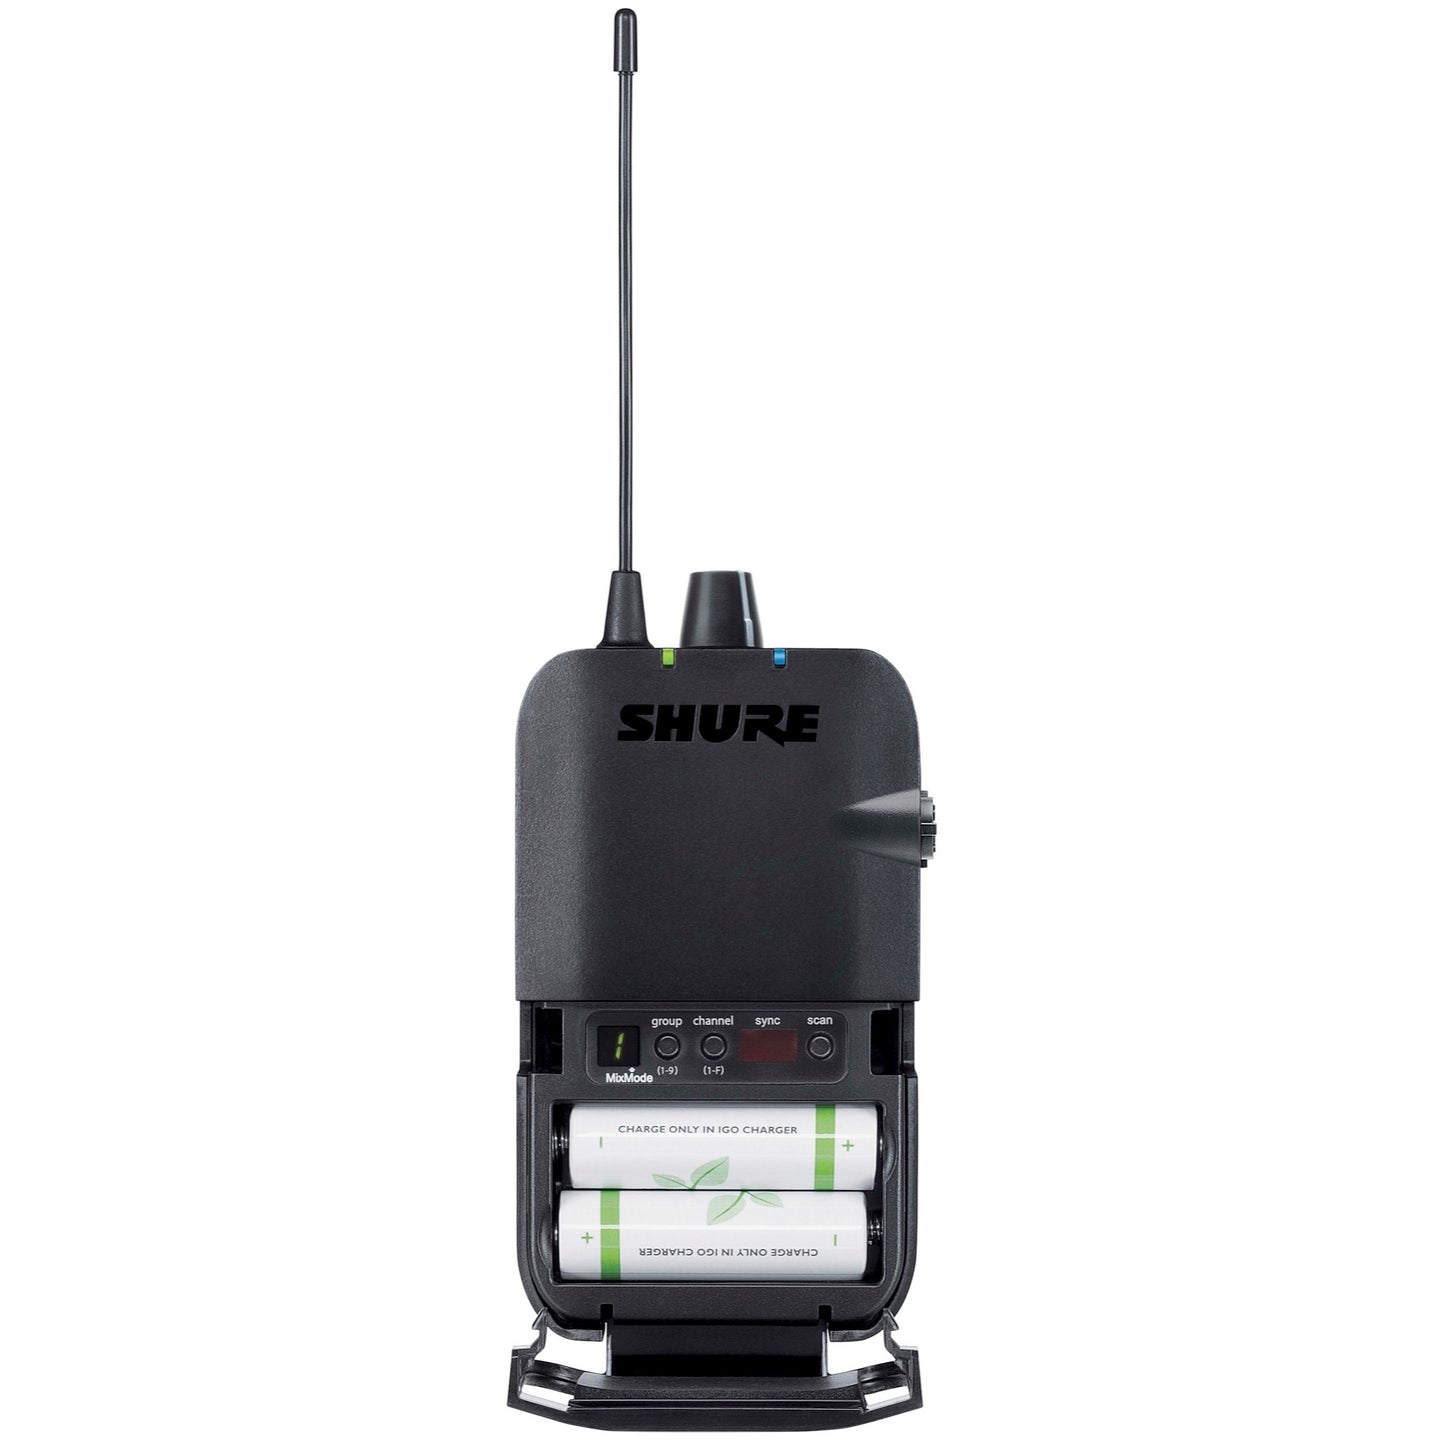 Shure P3R PSM300 Wireless In-Ear Monitor Bodypack, Band G20 (488.150 - 511.850 MHz)